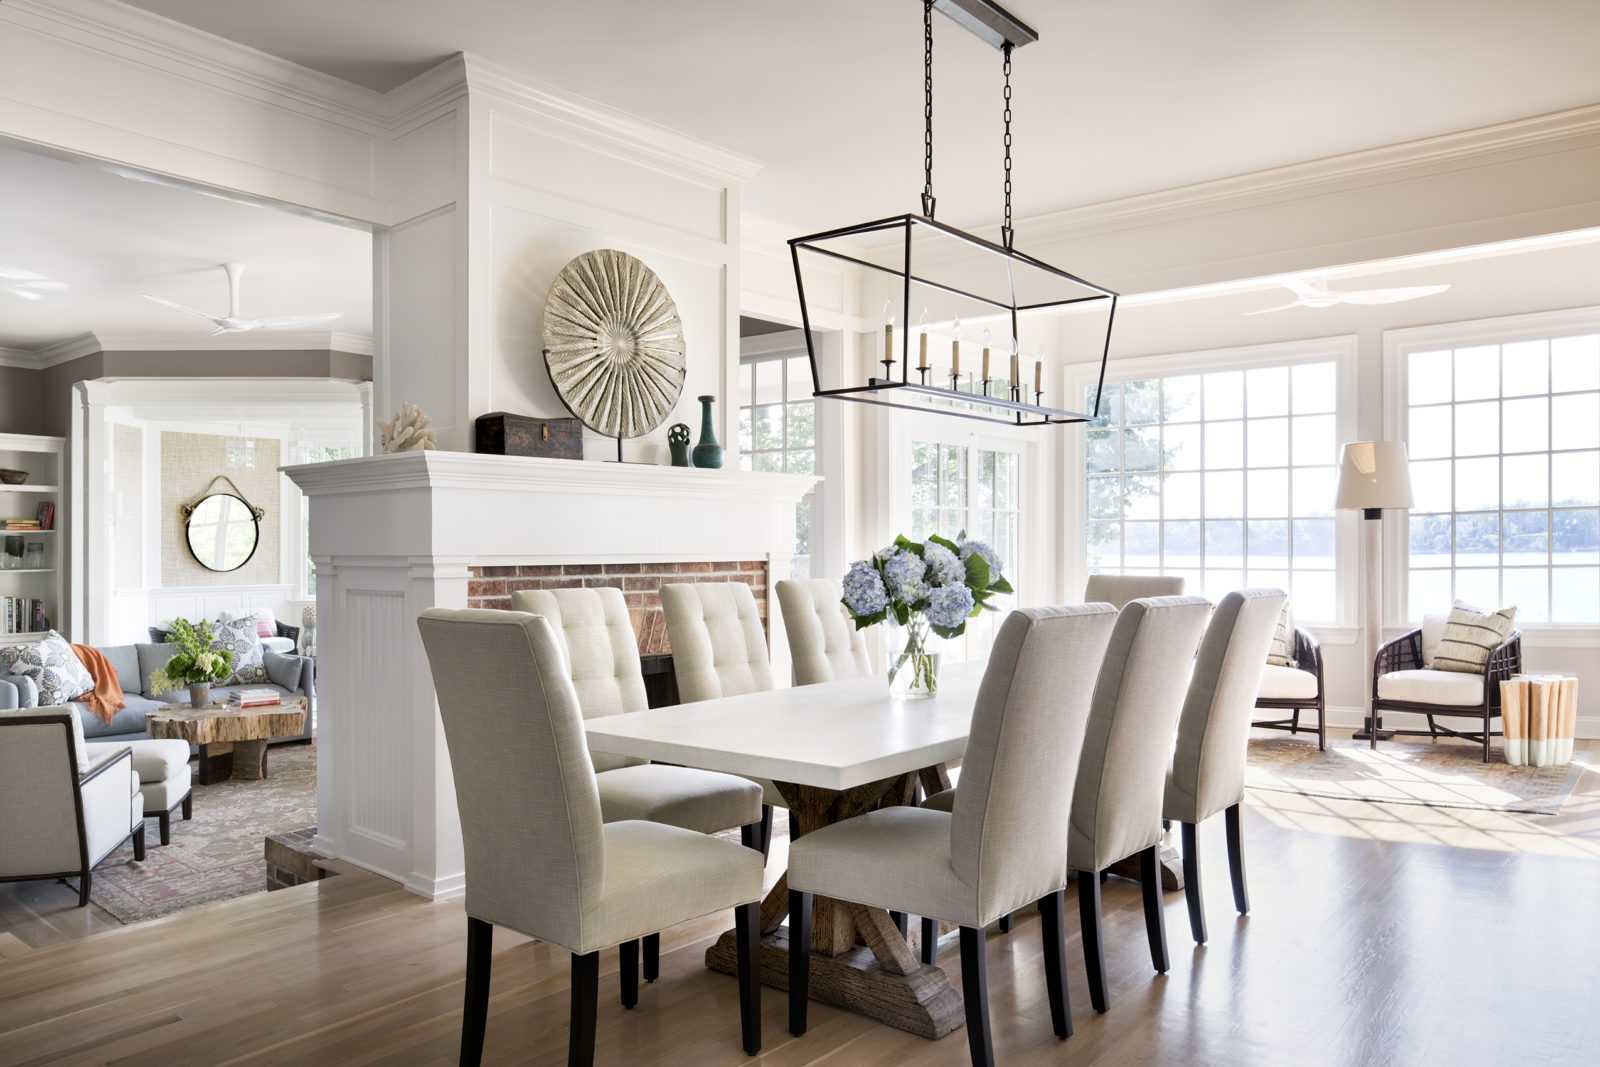 Contemporary and Clean neutral dining room in bright home